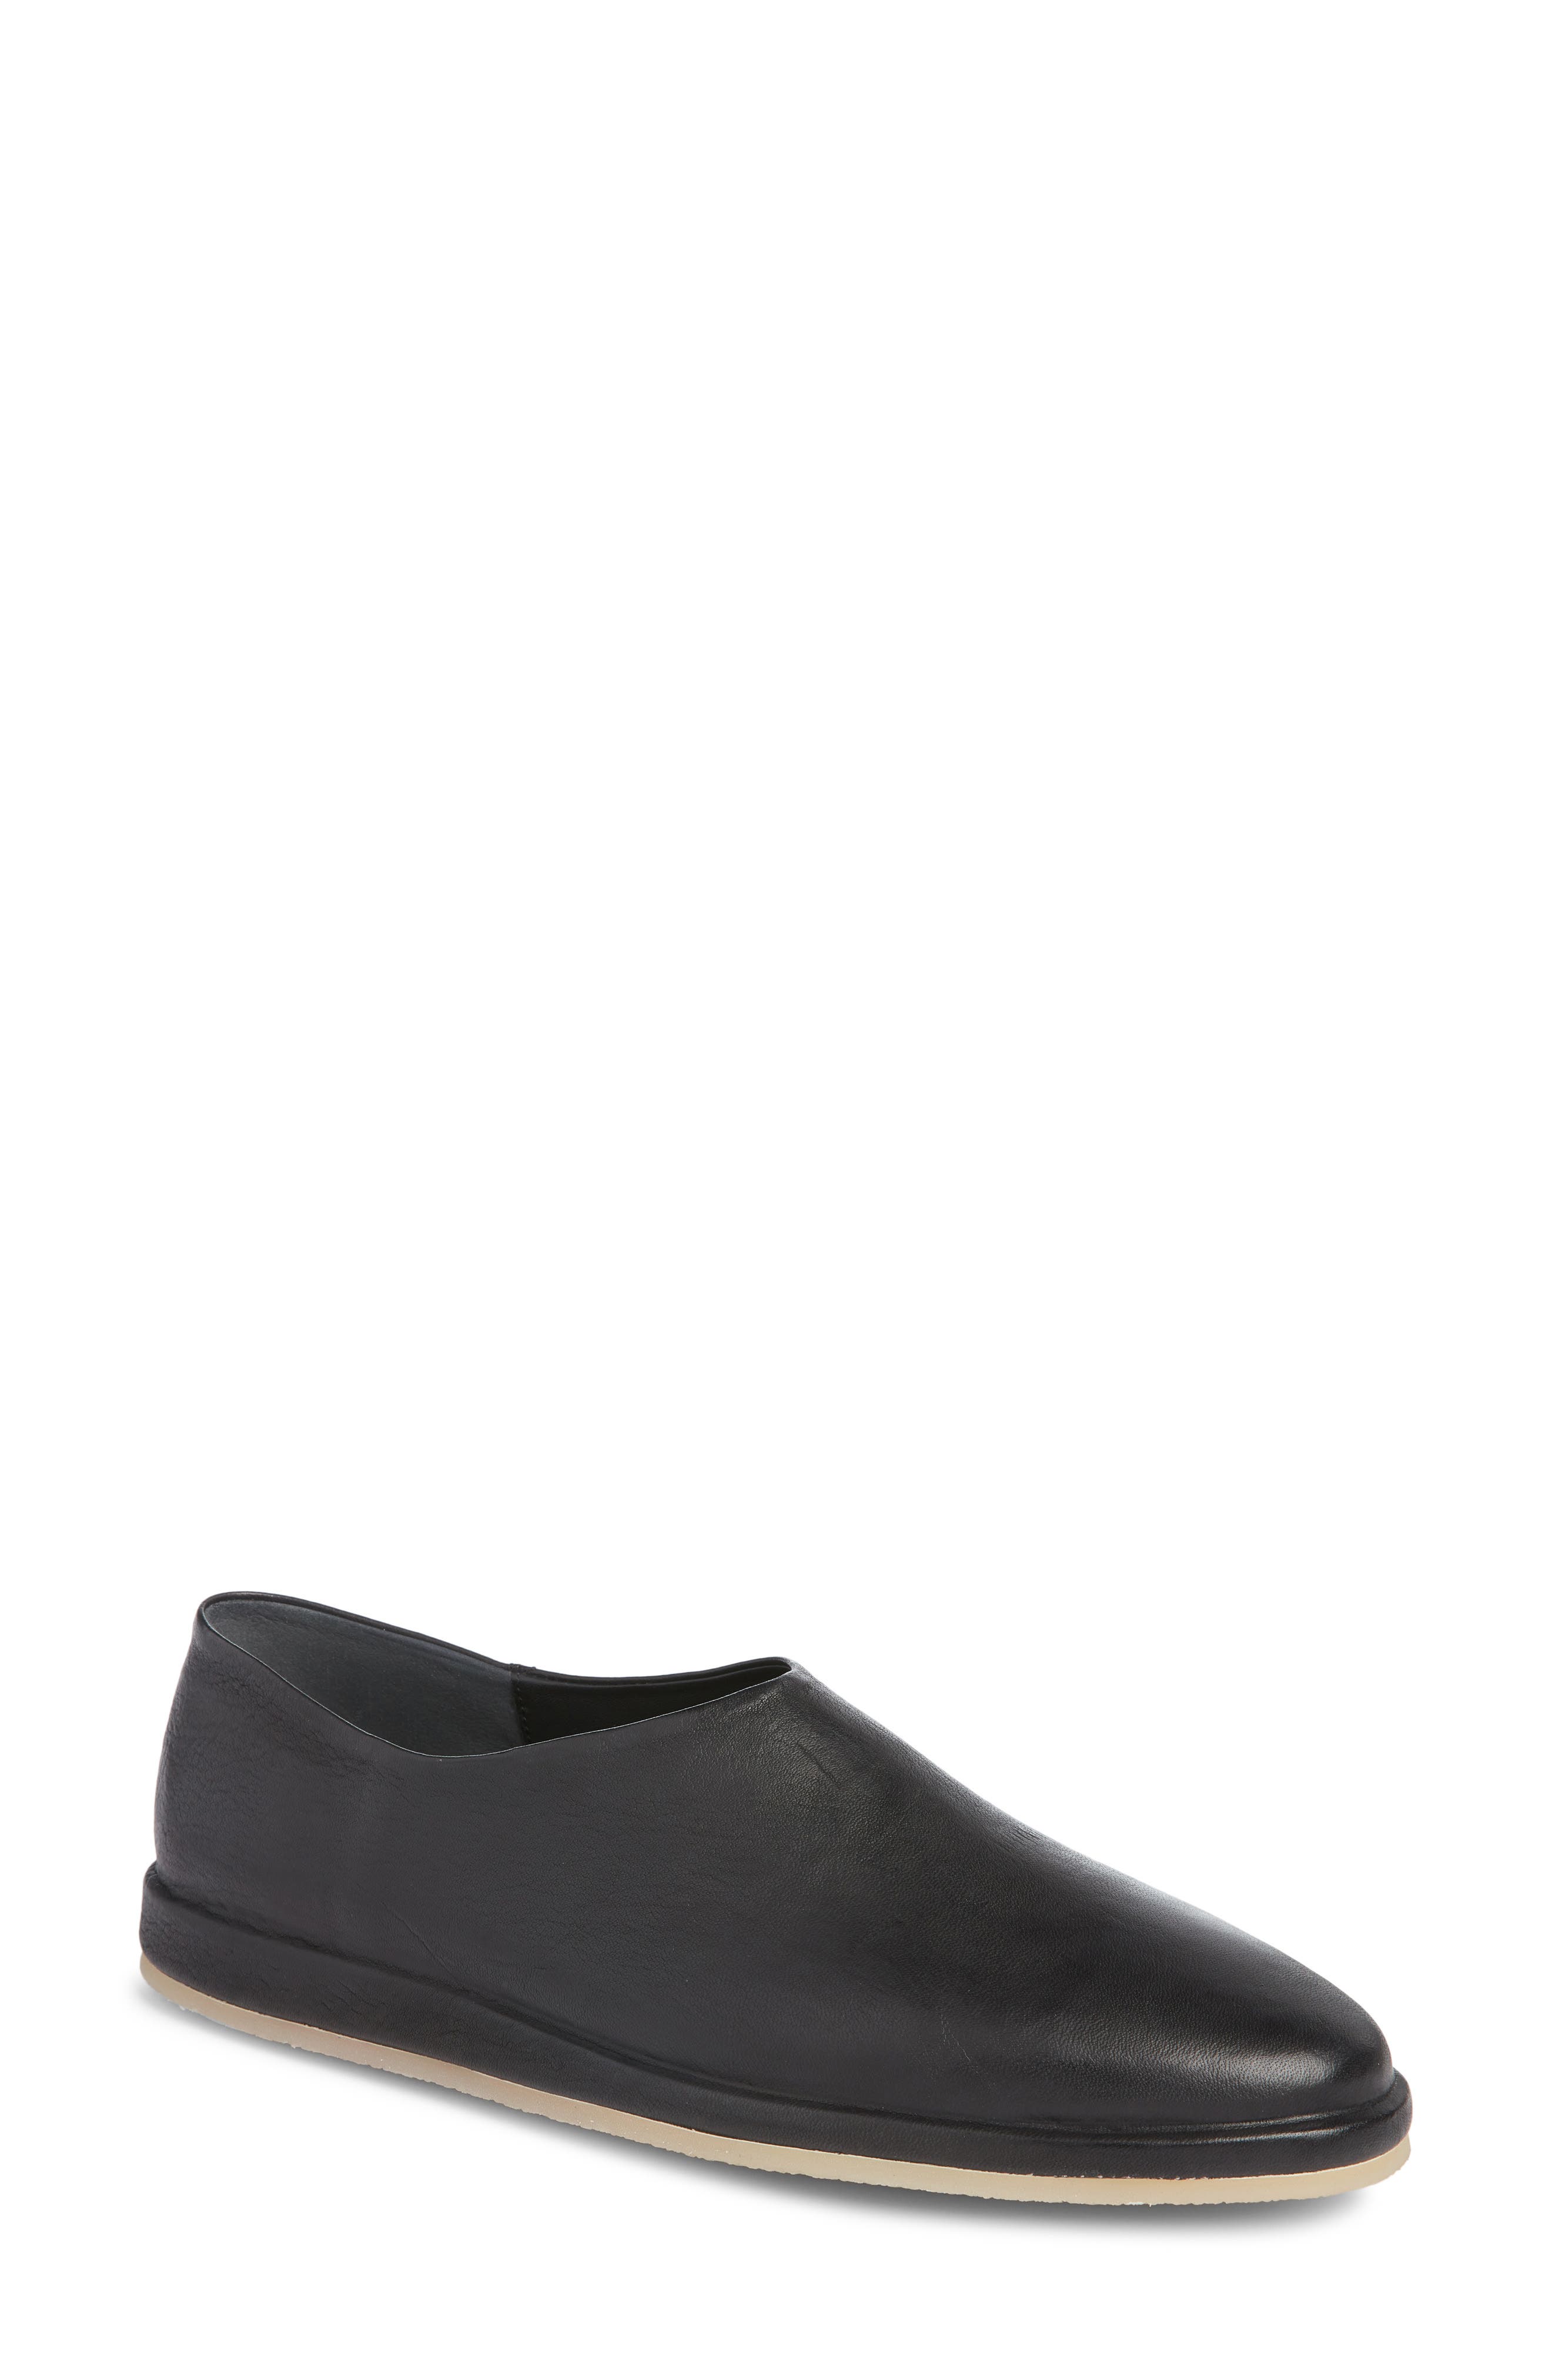 Fear of God The Mule Convertible Slip-On in Black at Nordstrom, Size 9-9.5Us